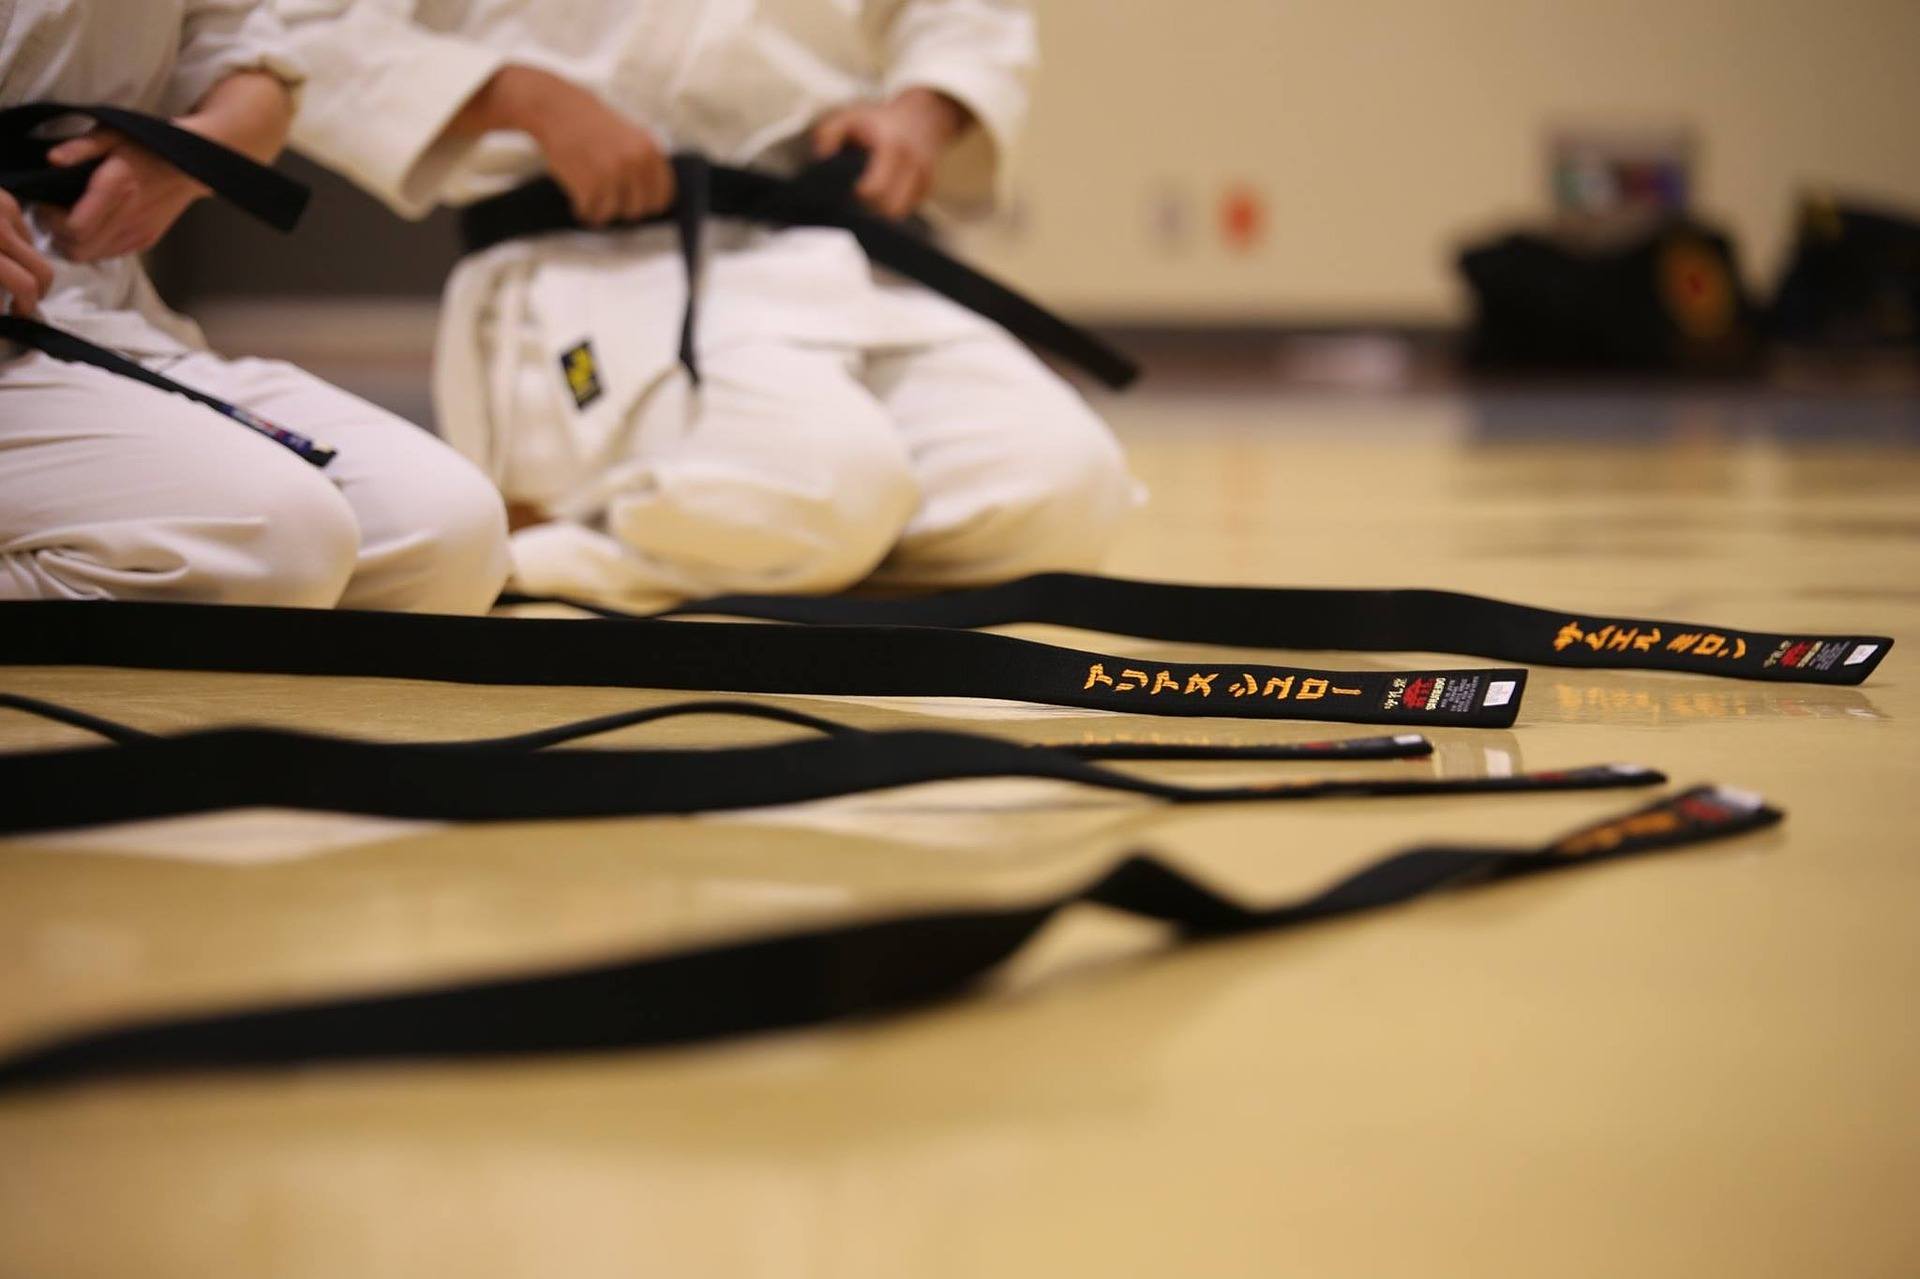 how to tie a martial arts belt